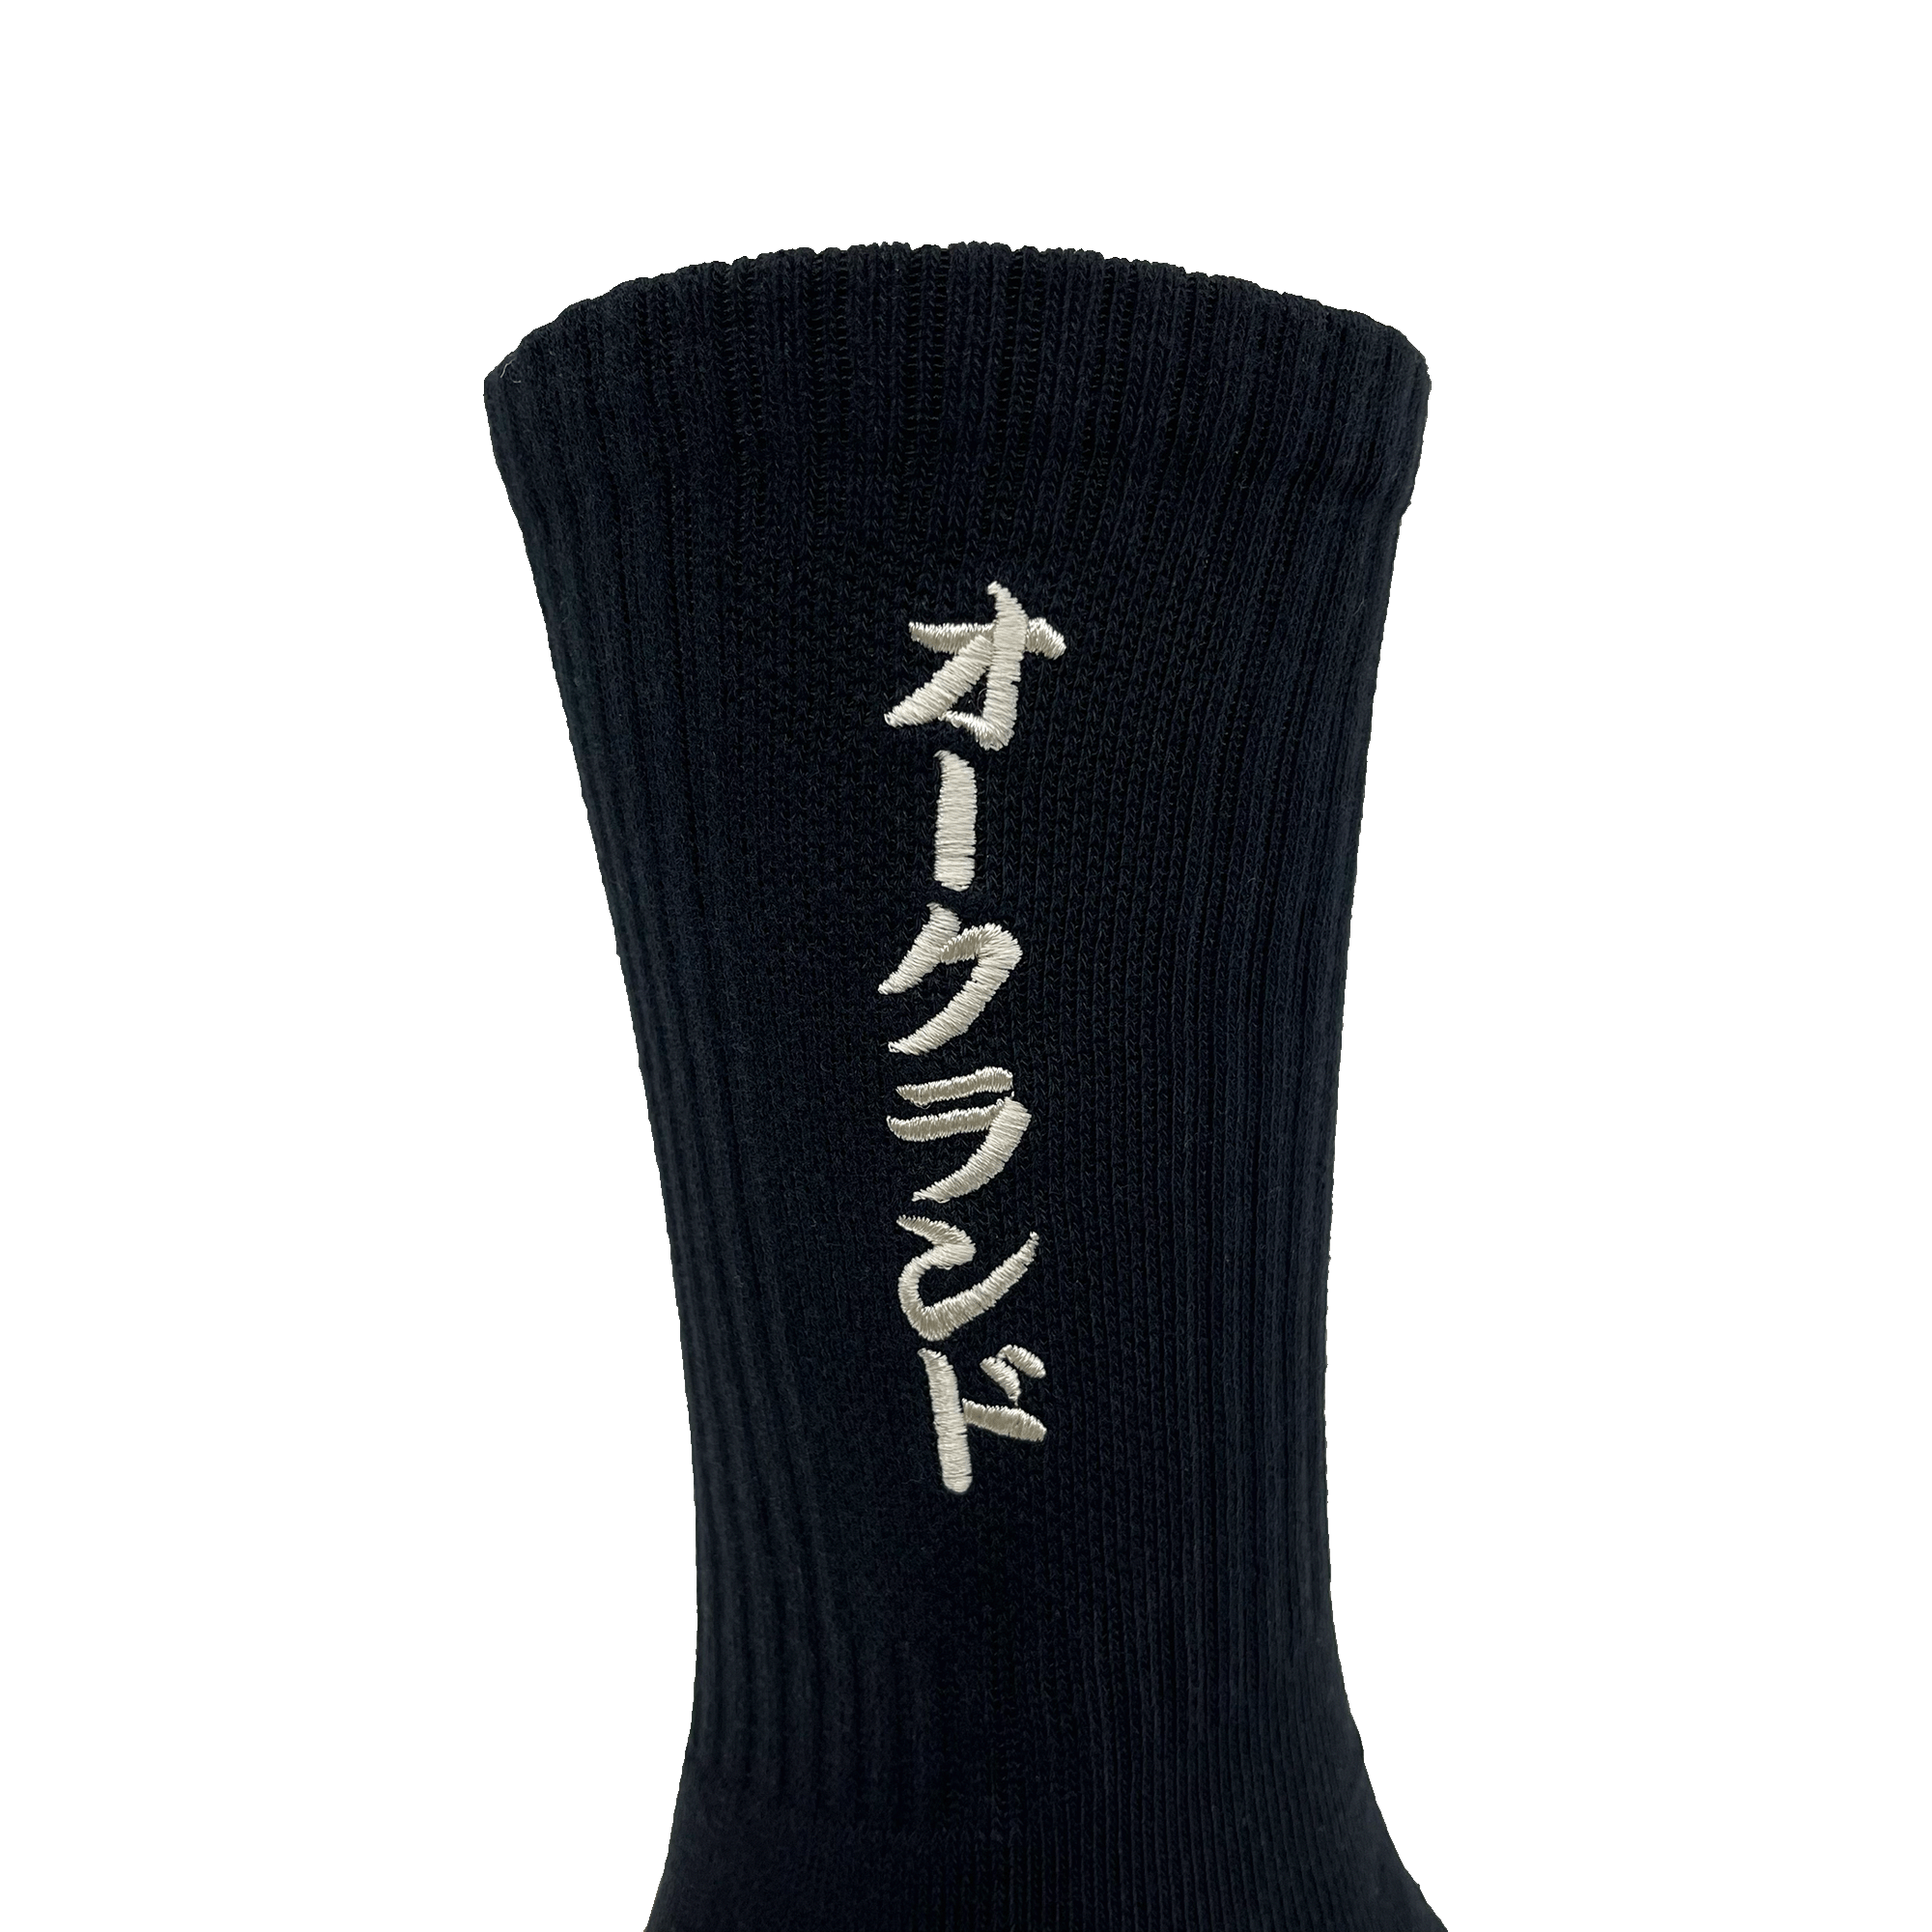 Close-up of embroidered white Kanji Japanese wordmark on the side of black crew sock.